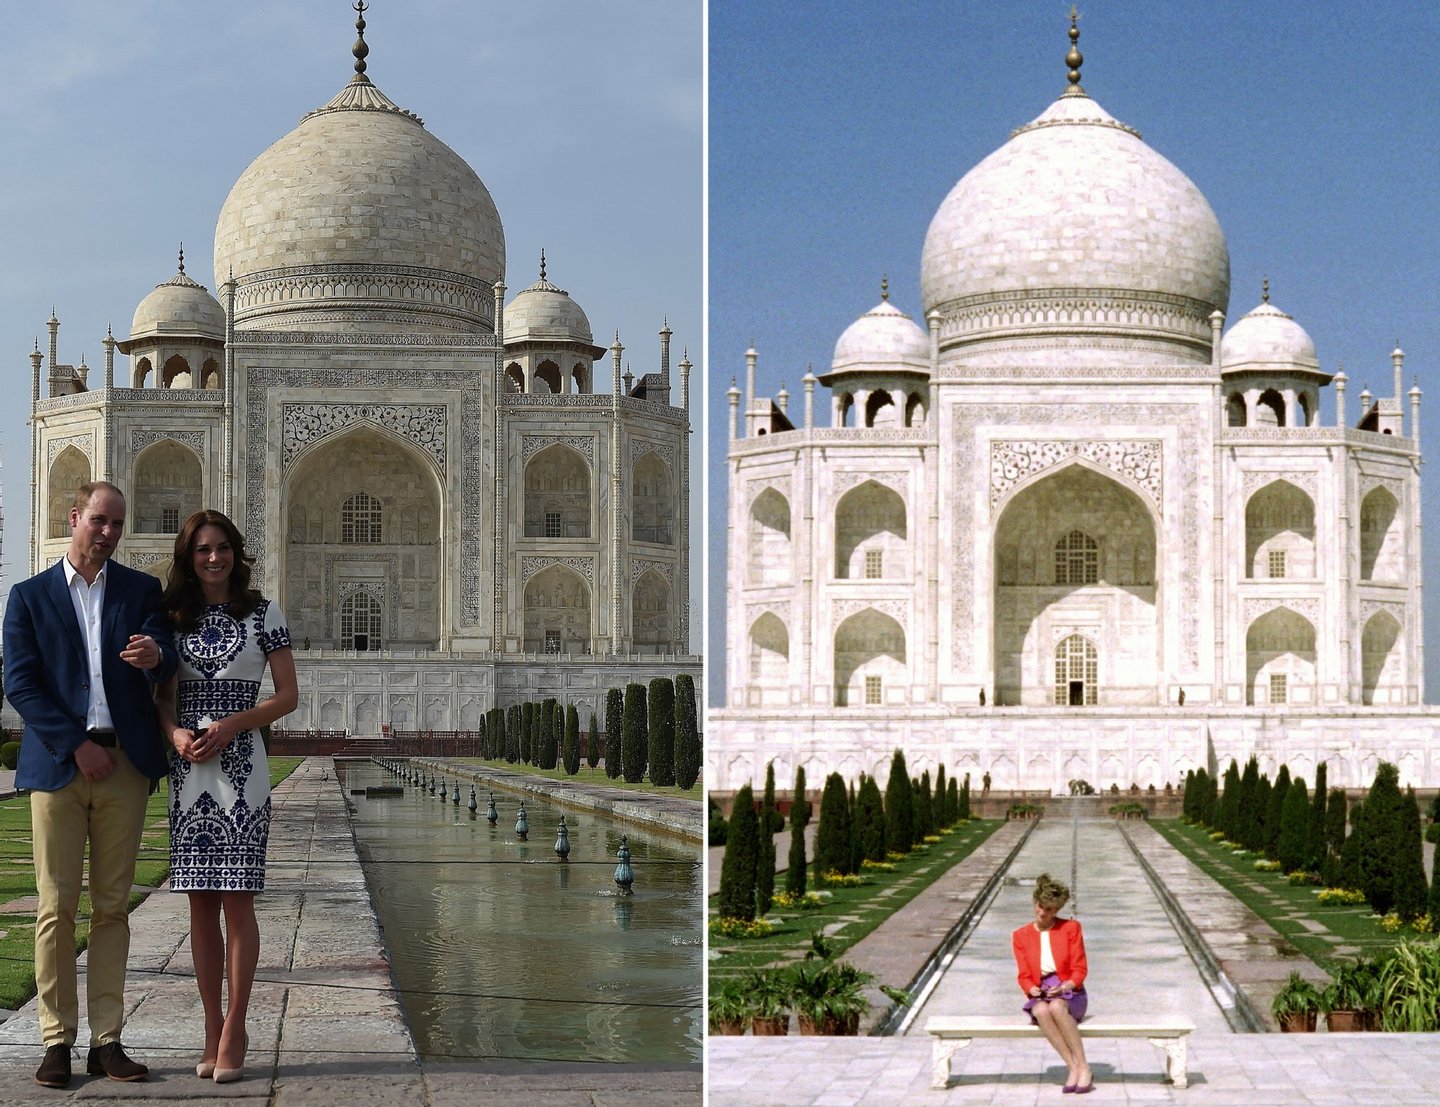 (FILES) This combination photograph shows (RIGHT) Princess Diana of Wales as she poses at The Taj Mahal in Agra on February 11, 1992, and (LEFT) Britain's Prince William, Duke of Cambridge(L)and Catherine, Duchess of Cambridge as they pose during their visit to The Taj Mahal in Agra on April 16, 2016. Prince William and his wife Catherine arrived at the Taj Mahal, wrapping up their week-long trip to India and Bhutan with a visit that carries poignant echoes for Britain's royal family. / AFP / Douglas CURRAN AND Prakash SINGH (Photo credit should read DOUGLAS CURRAN,PRAKASH SINGH/AFP/Getty Images)